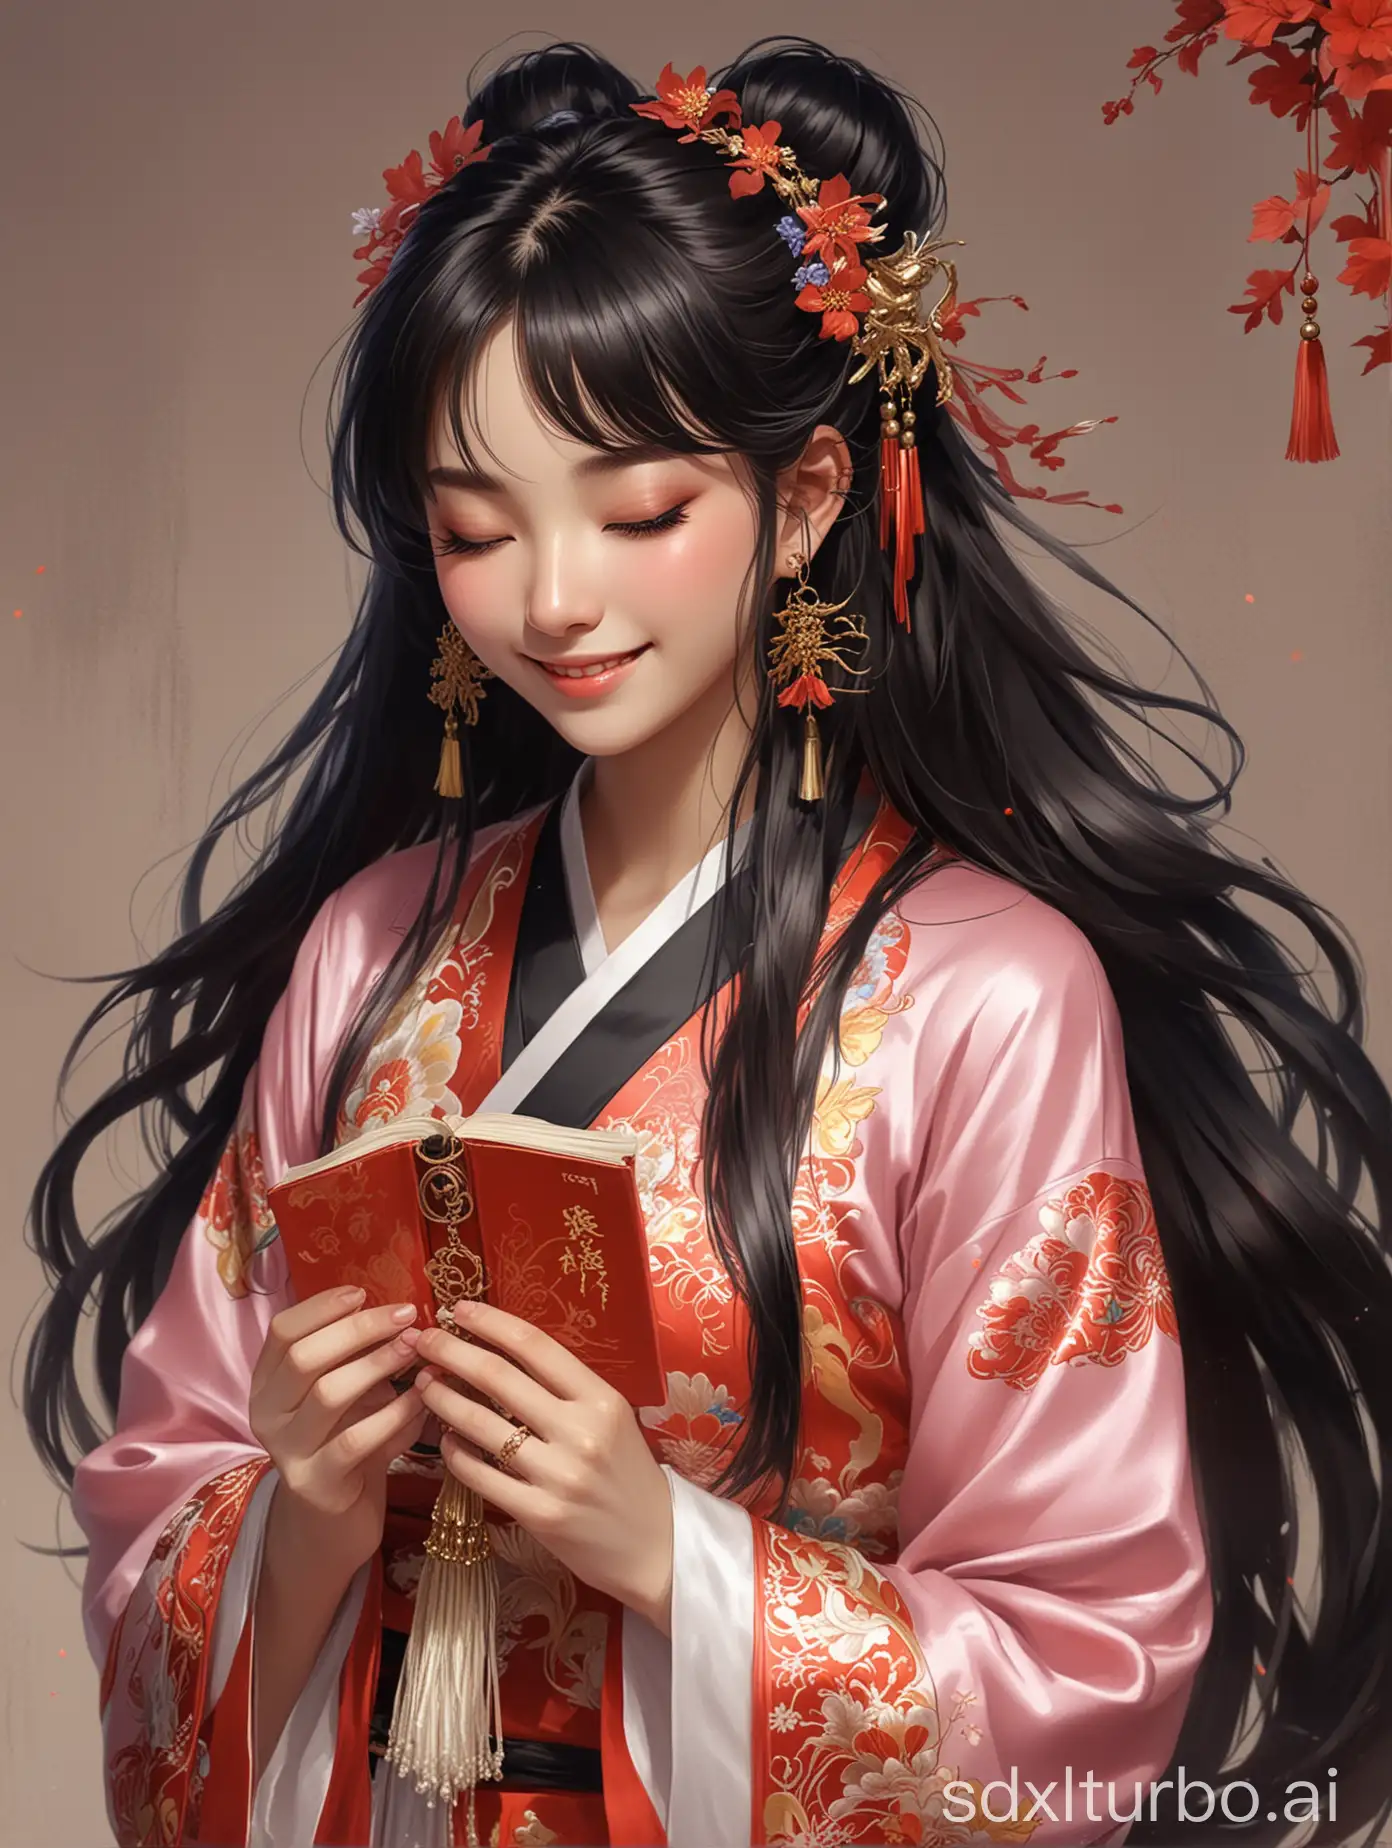 Smiling-Girl-in-Elegant-Chinese-Attire-Holding-a-Book-and-Adorned-with-Dragonthemed-Accessories